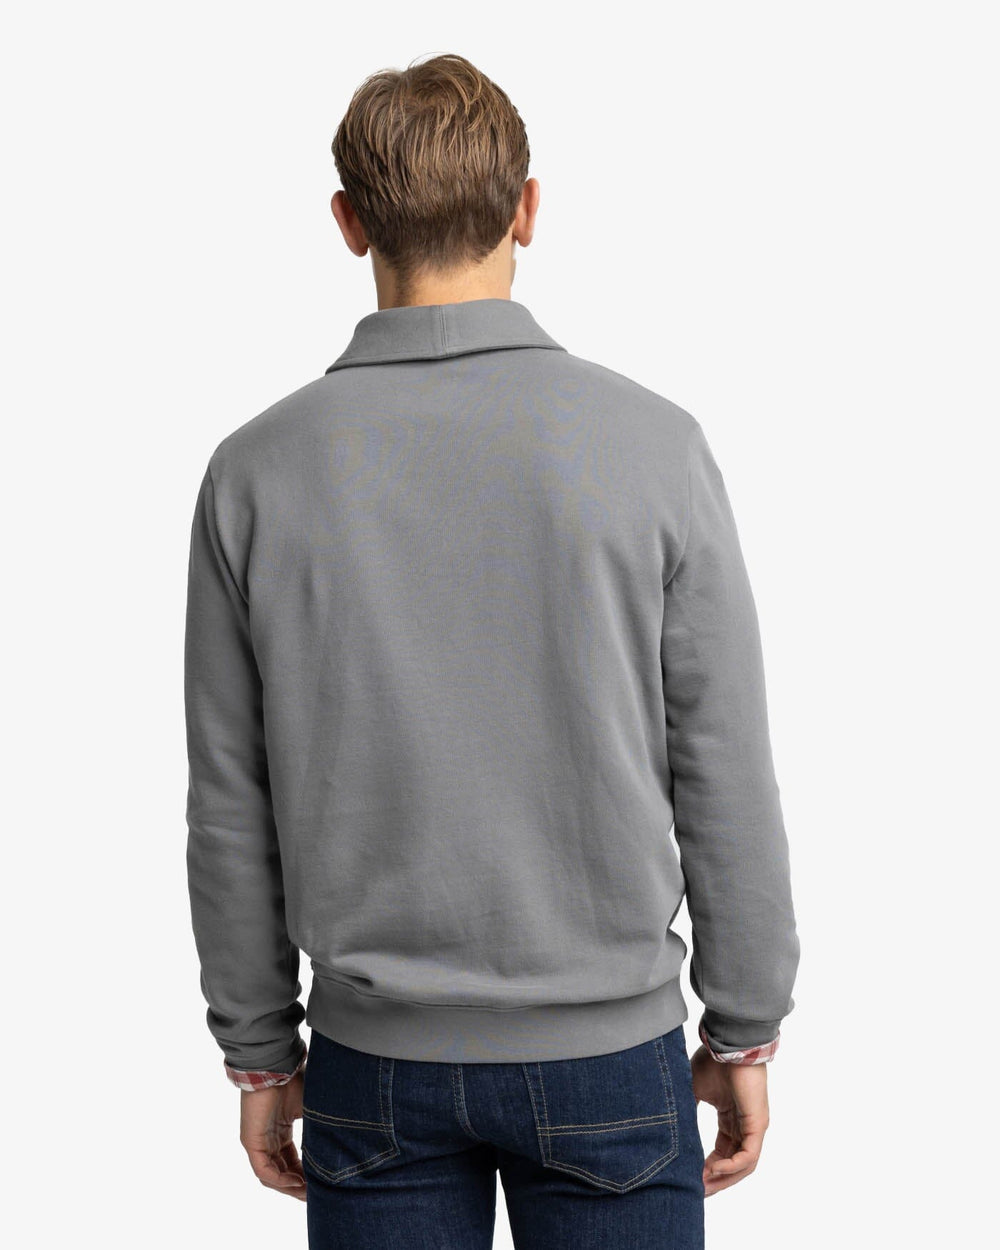 The back view of the Southern Tide Stanley Pullover by Southern Tide - Shadow Grey